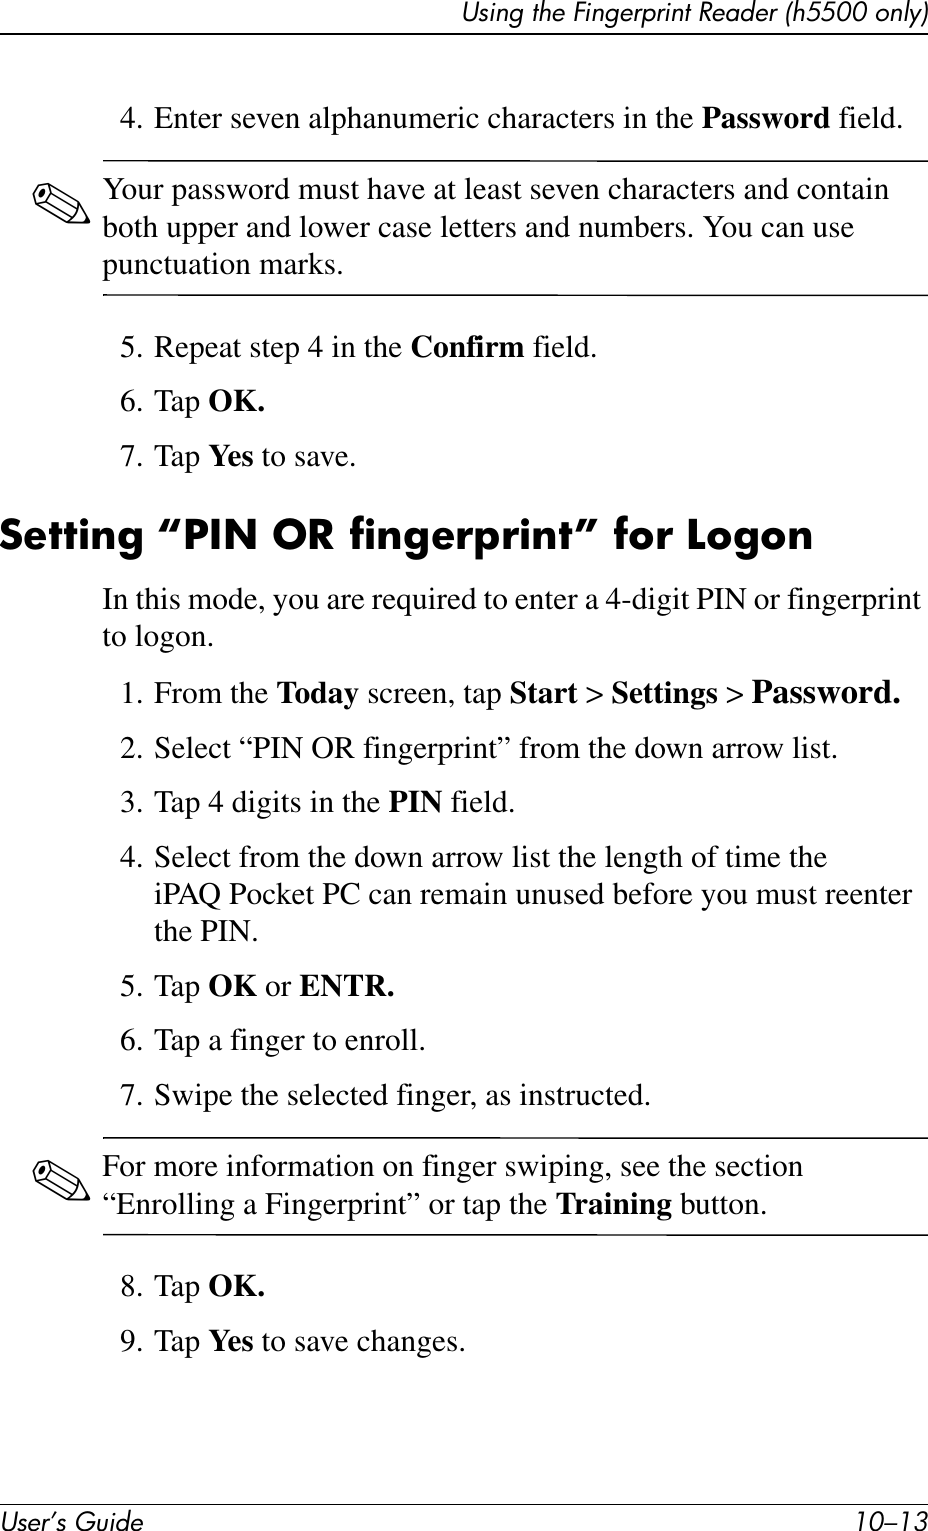 Using the Fingerprint Reader (h5500 only)User’s Guide 10–134. Enter seven alphanumeric characters in the Password field.✎Your password must have at least seven characters and contain both upper and lower case letters and numbers. You can use punctuation marks.5. Repeat step 4 in the Confirm field.6. Tap OK.7. Tap Ye s  to save.Setting “PIN OR fingerprint” for LogonIn this mode, you are required to enter a 4-digit PIN or fingerprint to logon.1. From the Today screen, tap Start &gt; Settings &gt; Password.2. Select “PIN OR fingerprint” from the down arrow list.3. Tap 4 digits in the PIN field.4. Select from the down arrow list the length of time the iPAQ Pocket PC can remain unused before you must reenter the PIN.5. Tap OK or ENTR.6. Tap a finger to enroll.7. Swipe the selected finger, as instructed. ✎For more information on finger swiping, see the section “Enrolling a Fingerprint” or tap the Training button.8. Tap OK.9. Tap Ye s  to save changes.